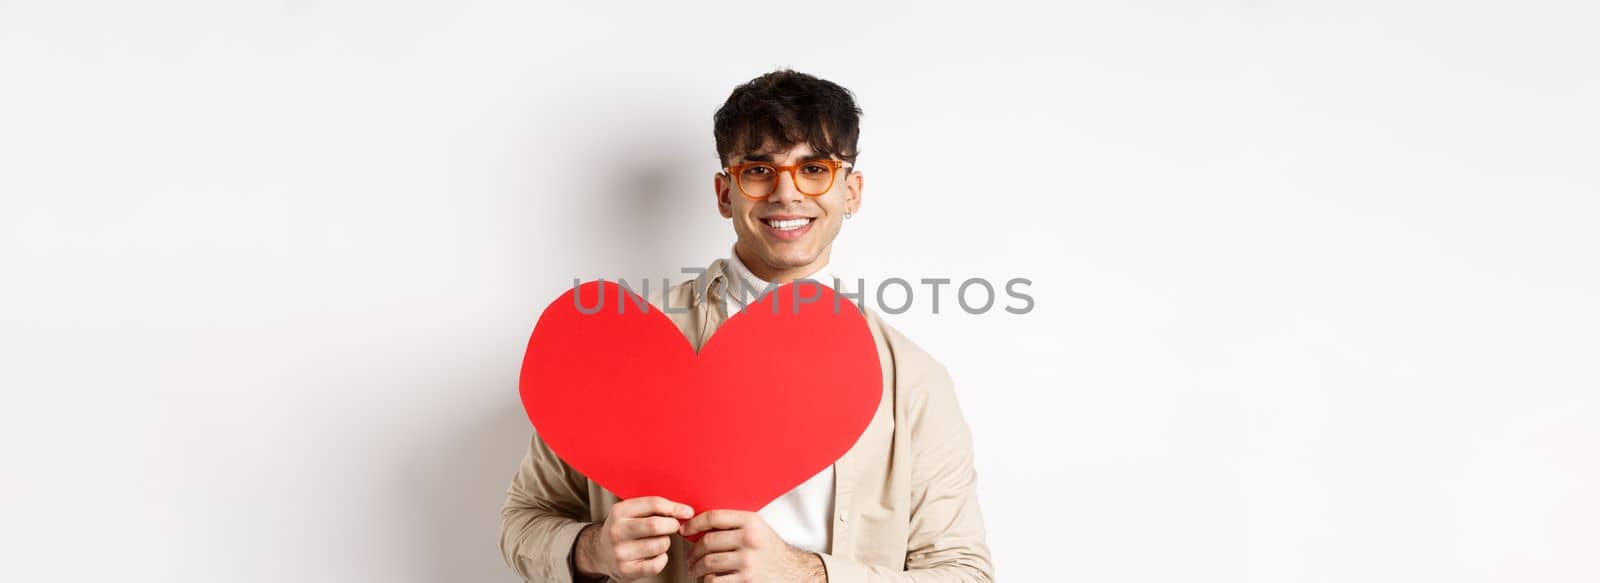 Handsome hipster guy with sunglasses and earring, waiting for true love on Valentines day, holding big red heart and smiling, standing over white background.